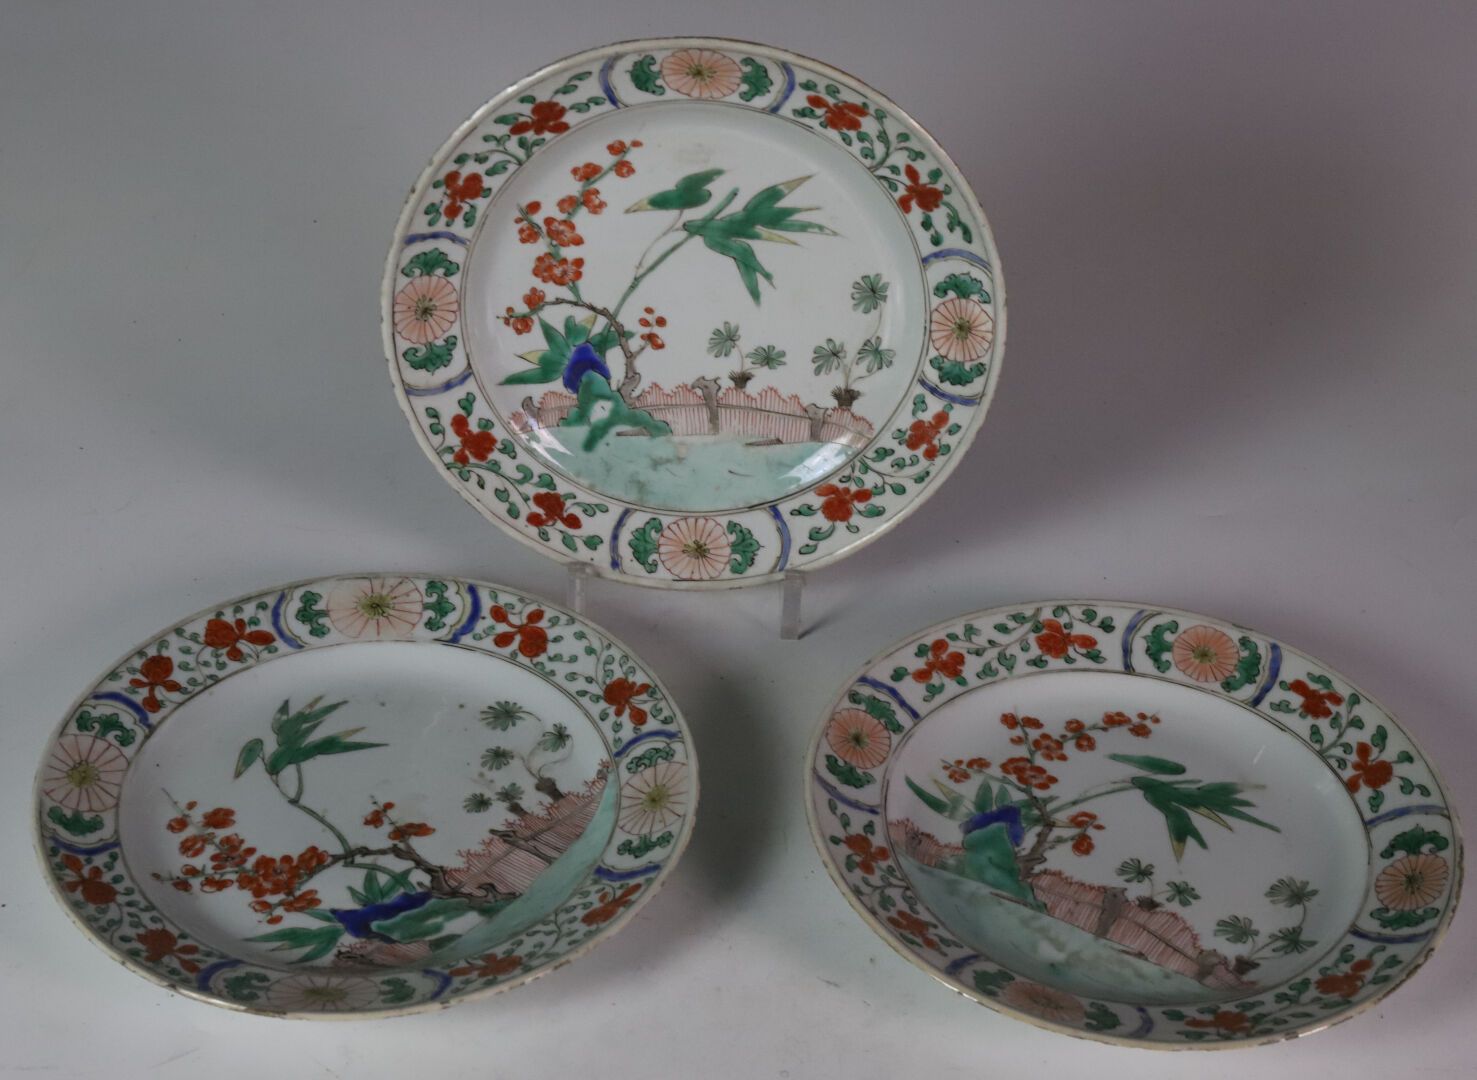 Null COMPAGNIE DES INDES 18th century

Suite of three porcelain plates, green fa&hellip;